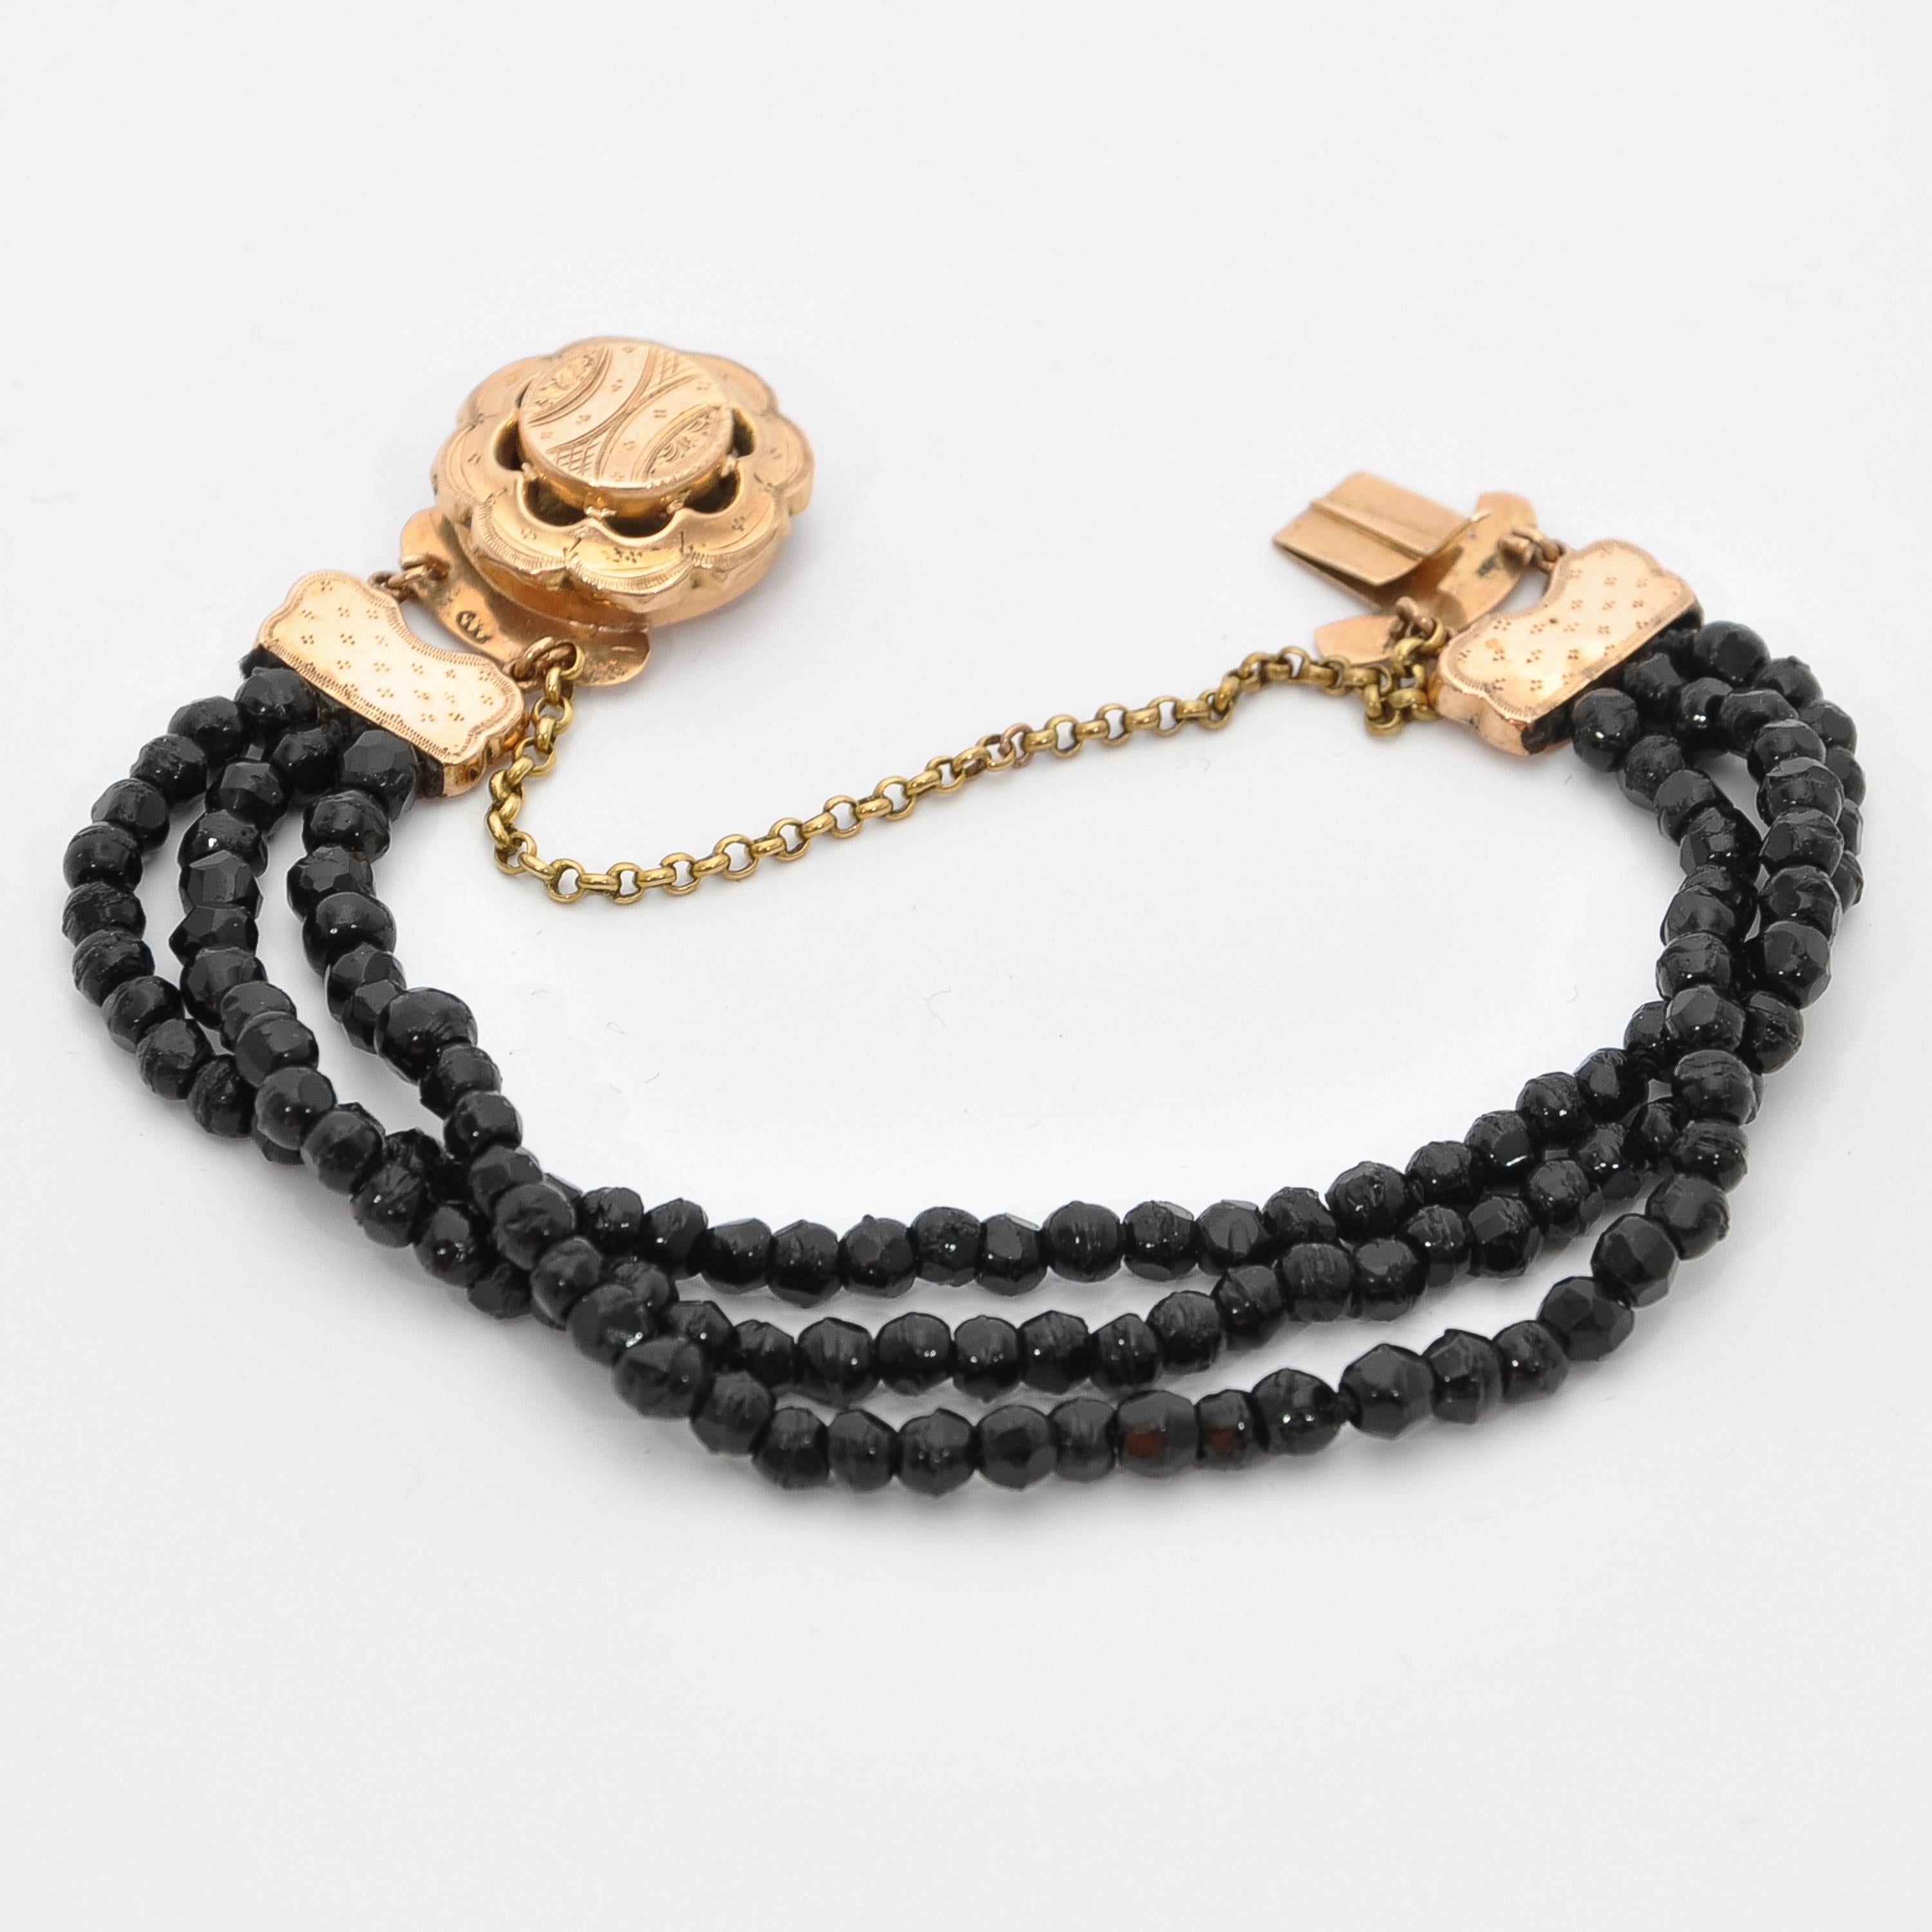 14 karat yellow gold black jet bracelet with a beautifully etched round clasp. The bracelet is made of three-strands, the beads are made of faceted jet. The clasp has an etched design on top with an openwork design in the center which represents a